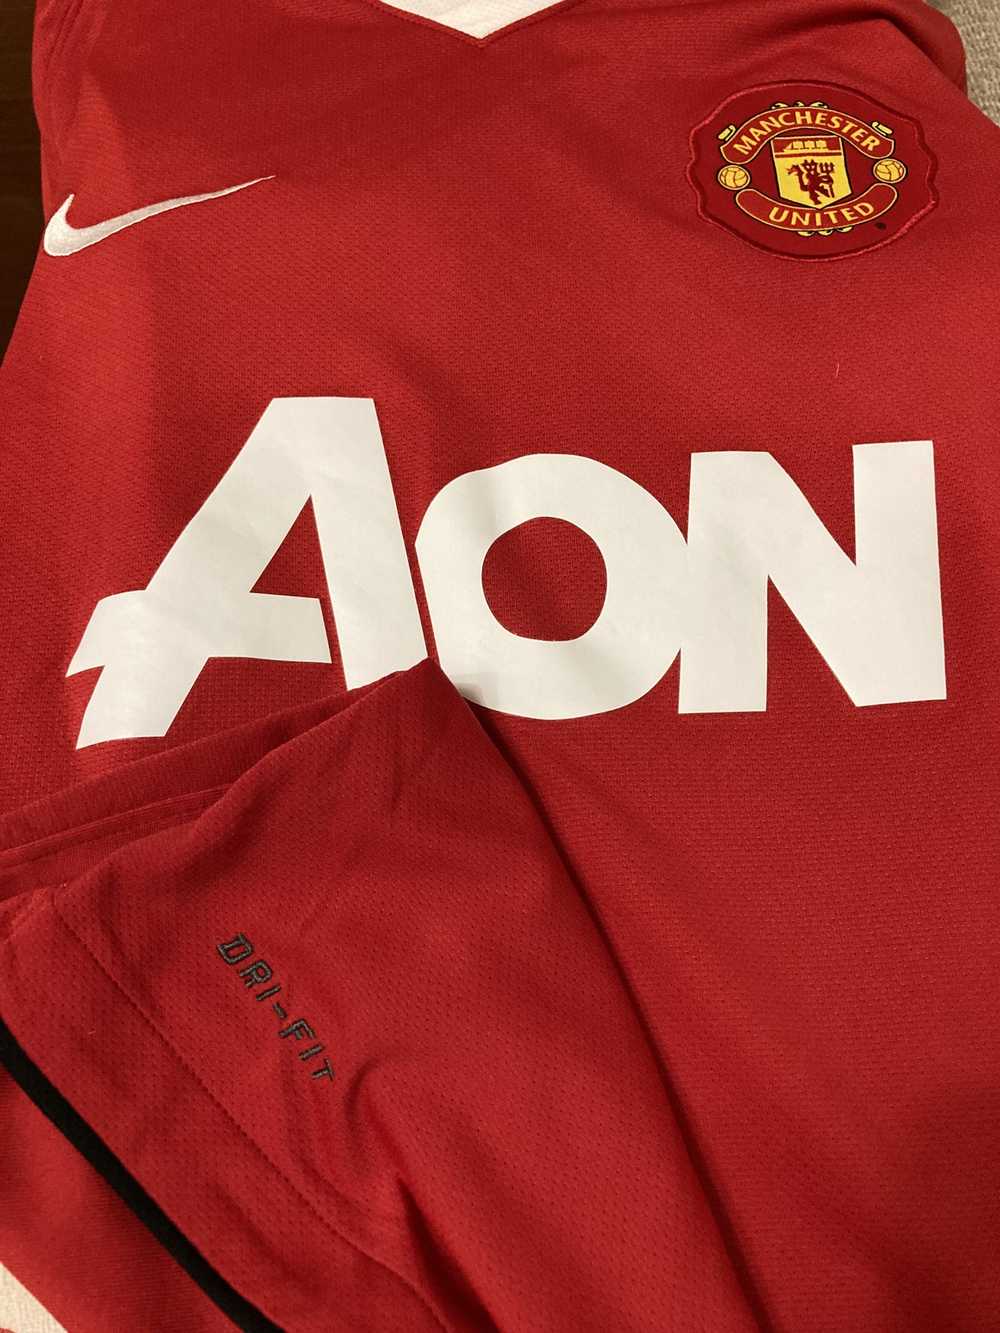 Manchester United × Nike × Soccer Jersey Jersey N… - image 4